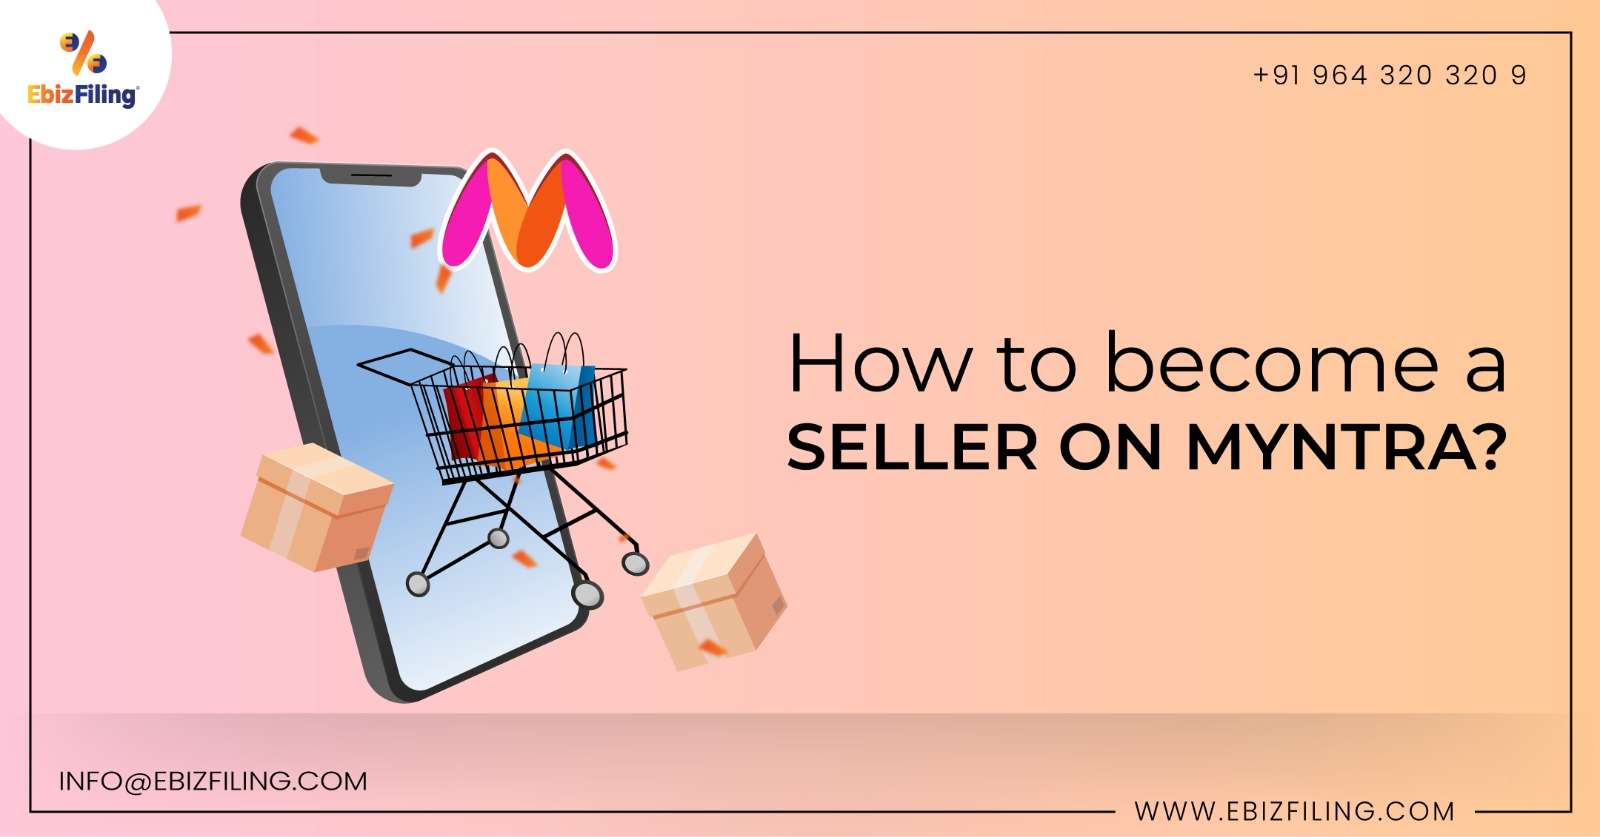 How to register on Myntra as a seller?